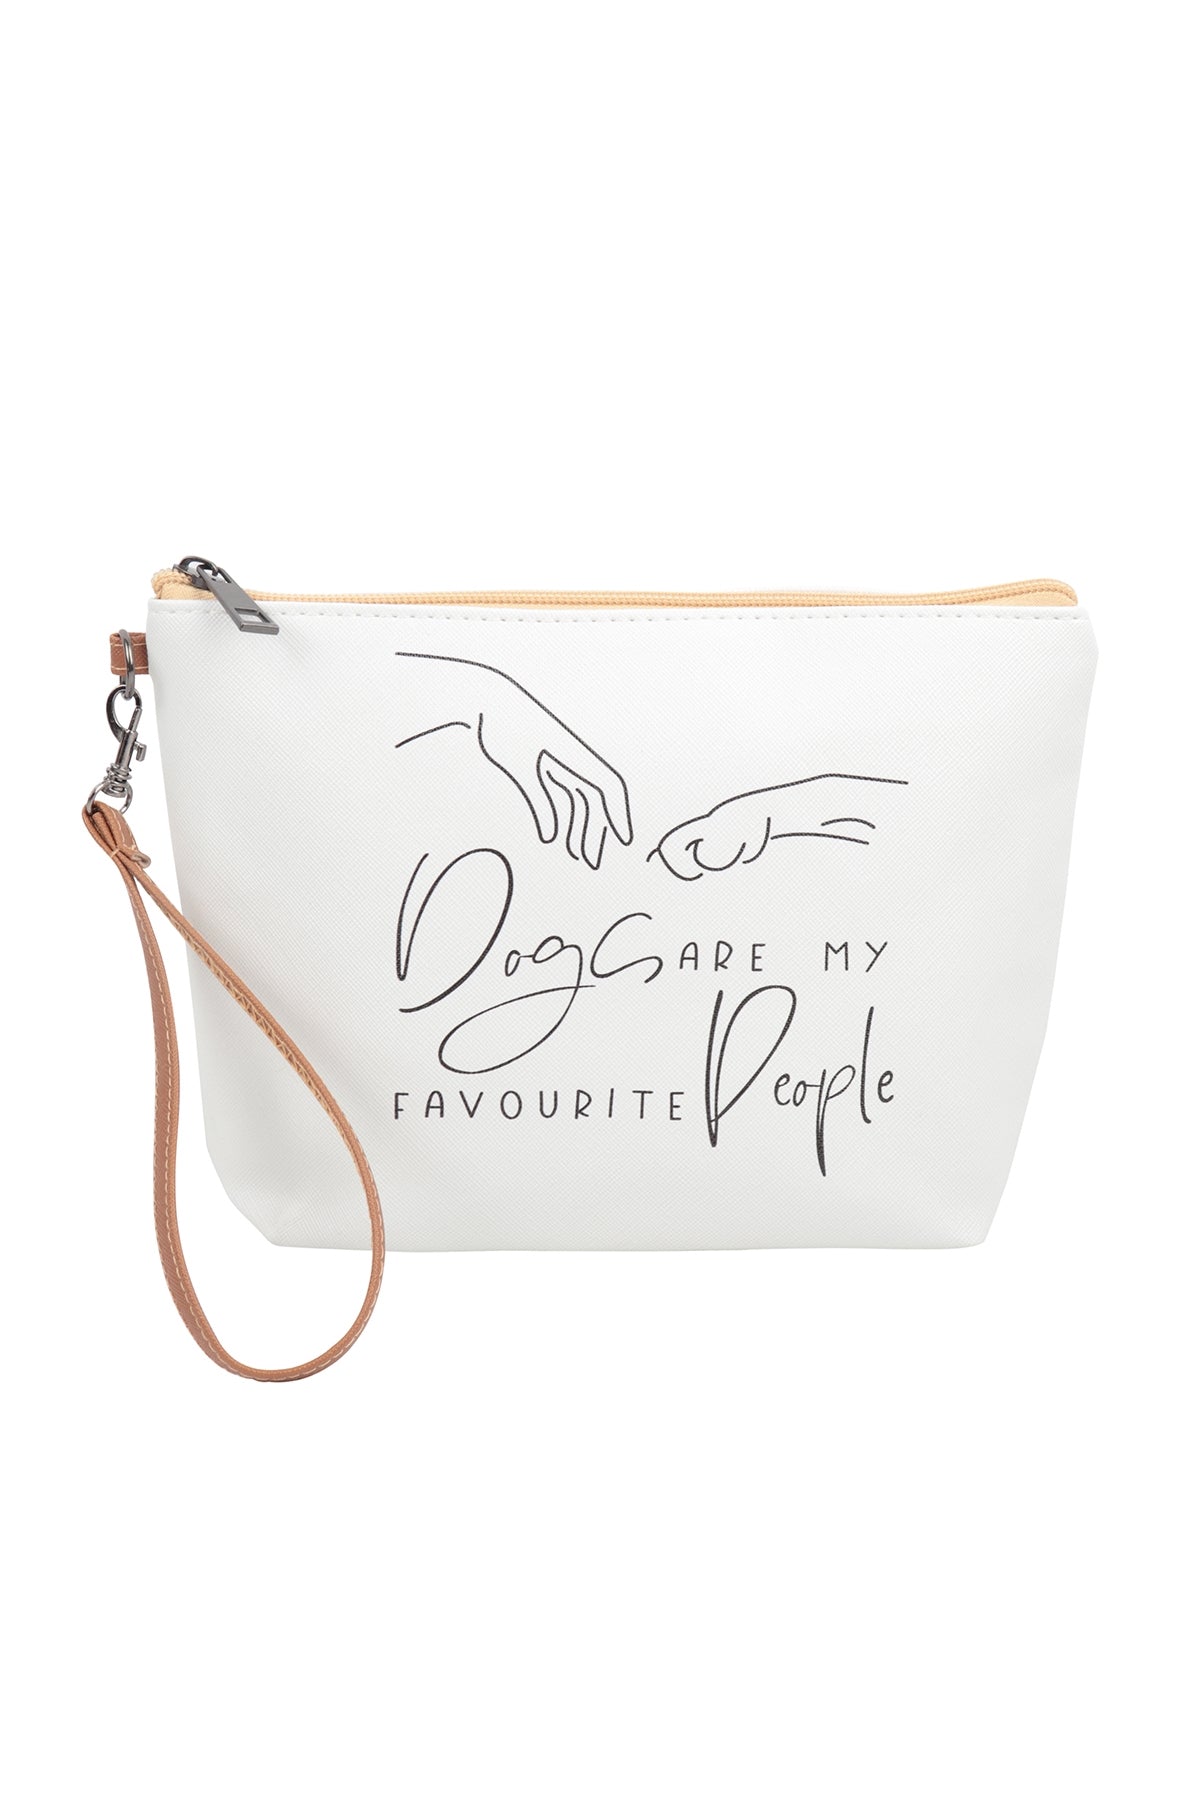 DOG CARE MY FAVORITE PEOPLE PRINT COSMETIC POUCH BAG W/ WRISTLET (NOW $1.50 ONLY!)